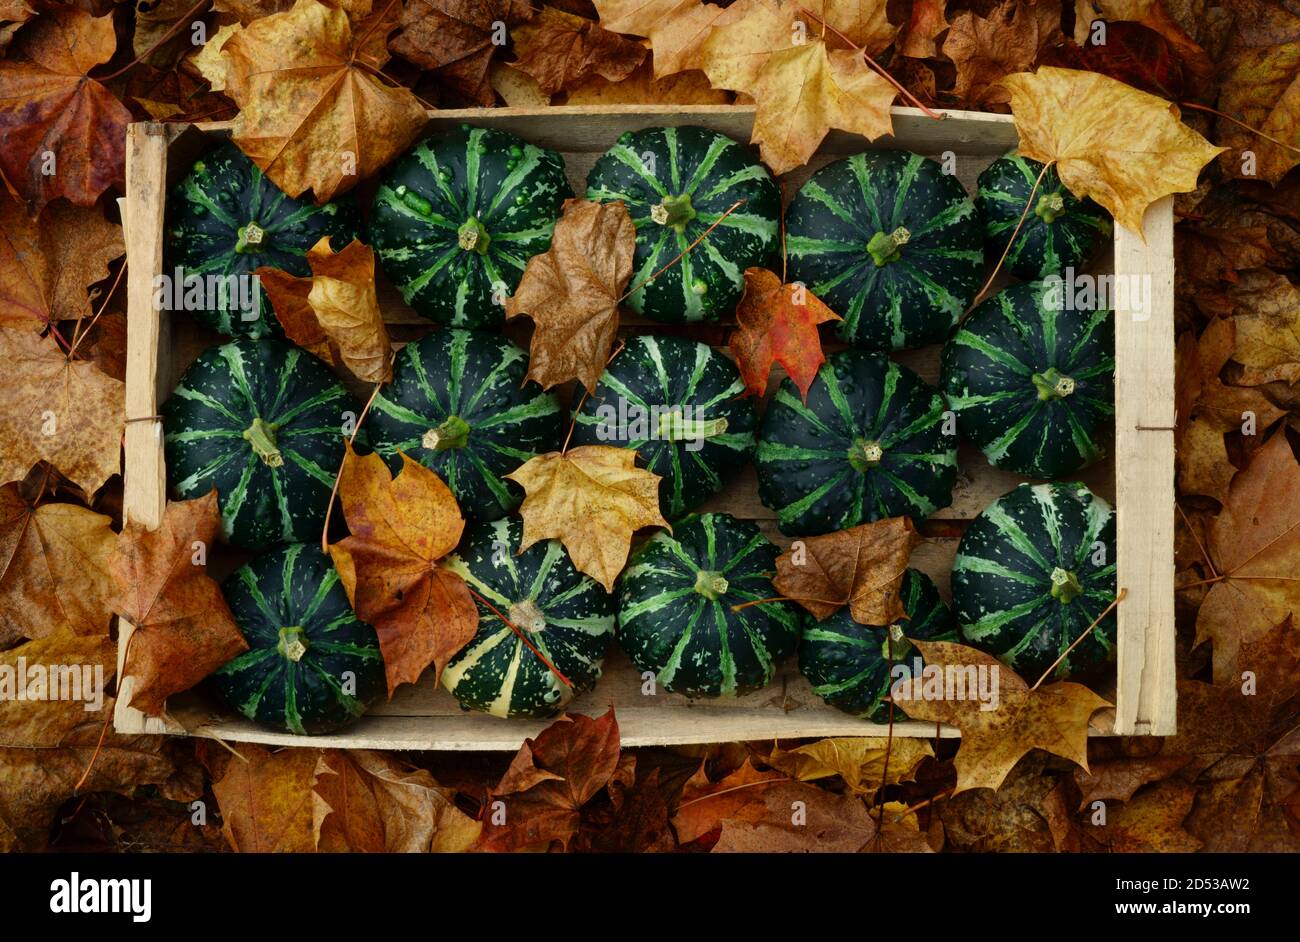 Squashes in a wooden tray with fallen leaves. Stock Photo